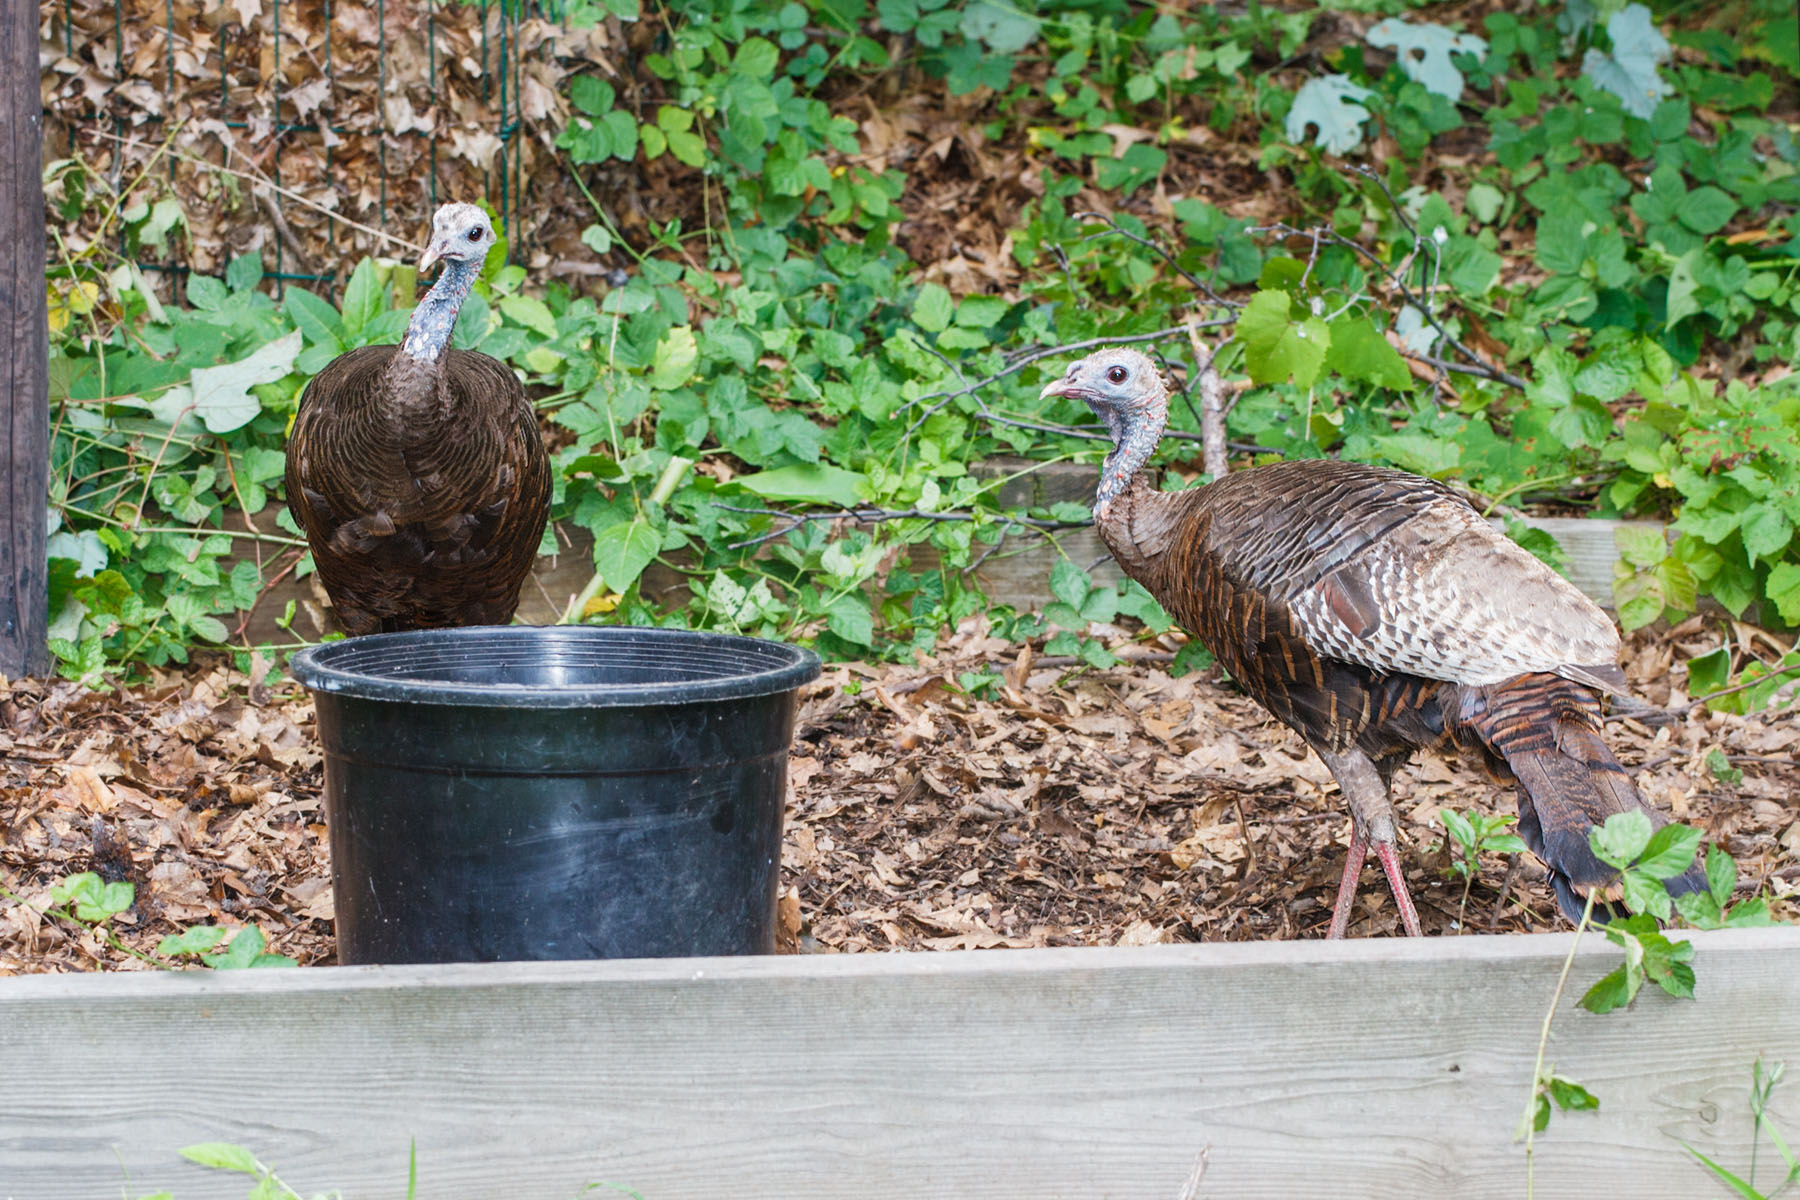 Turkeys checking out the cracked corn in the black pot.  Click for next photo.